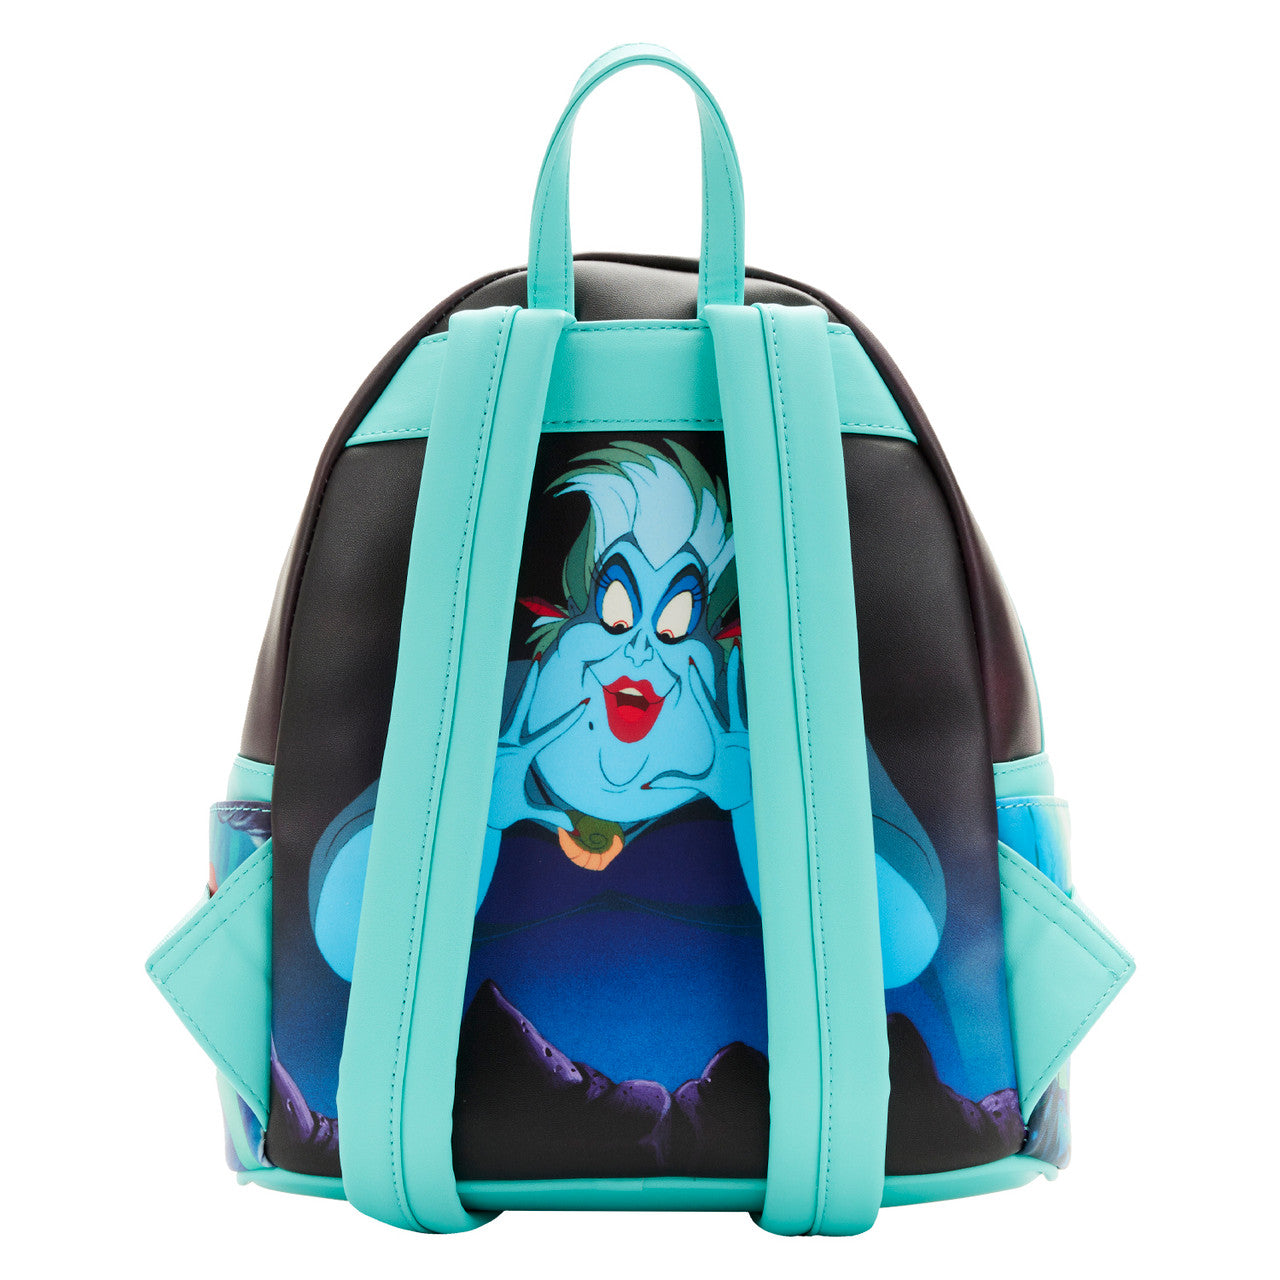 Load image into Gallery viewer, Movie Scenes (The Little Mermaid) Disney Mini Backpack by Loungefly
